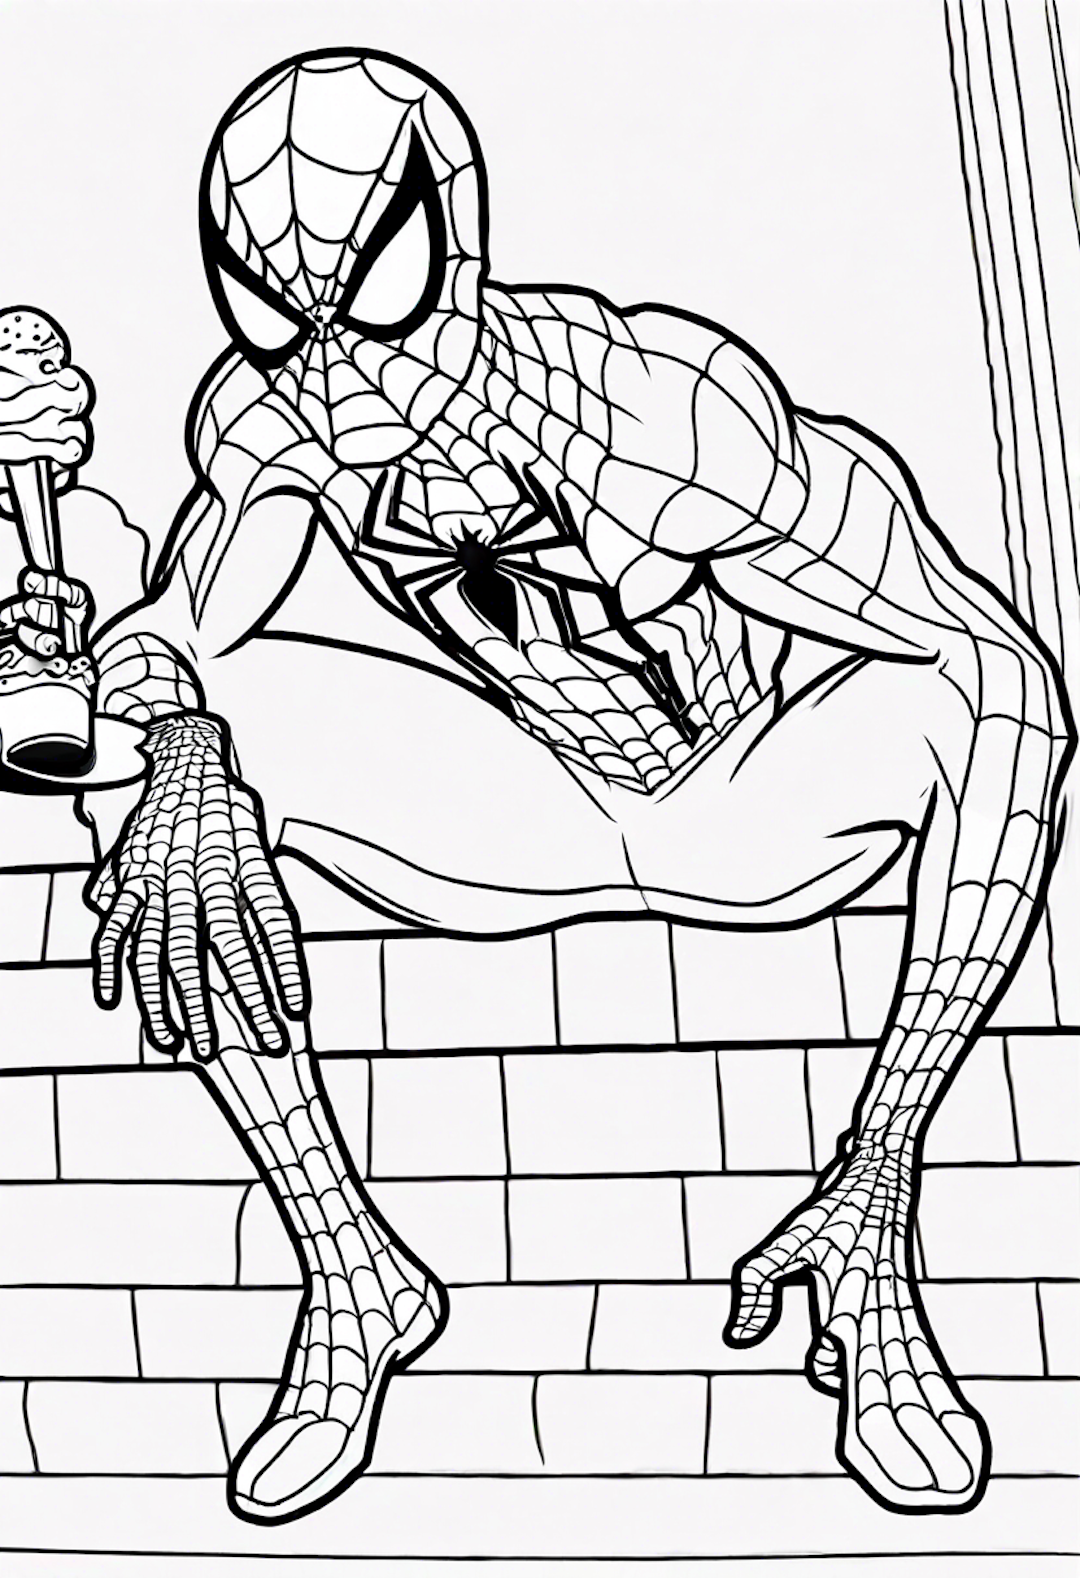 Spiderman At The Ice Cream Parlor